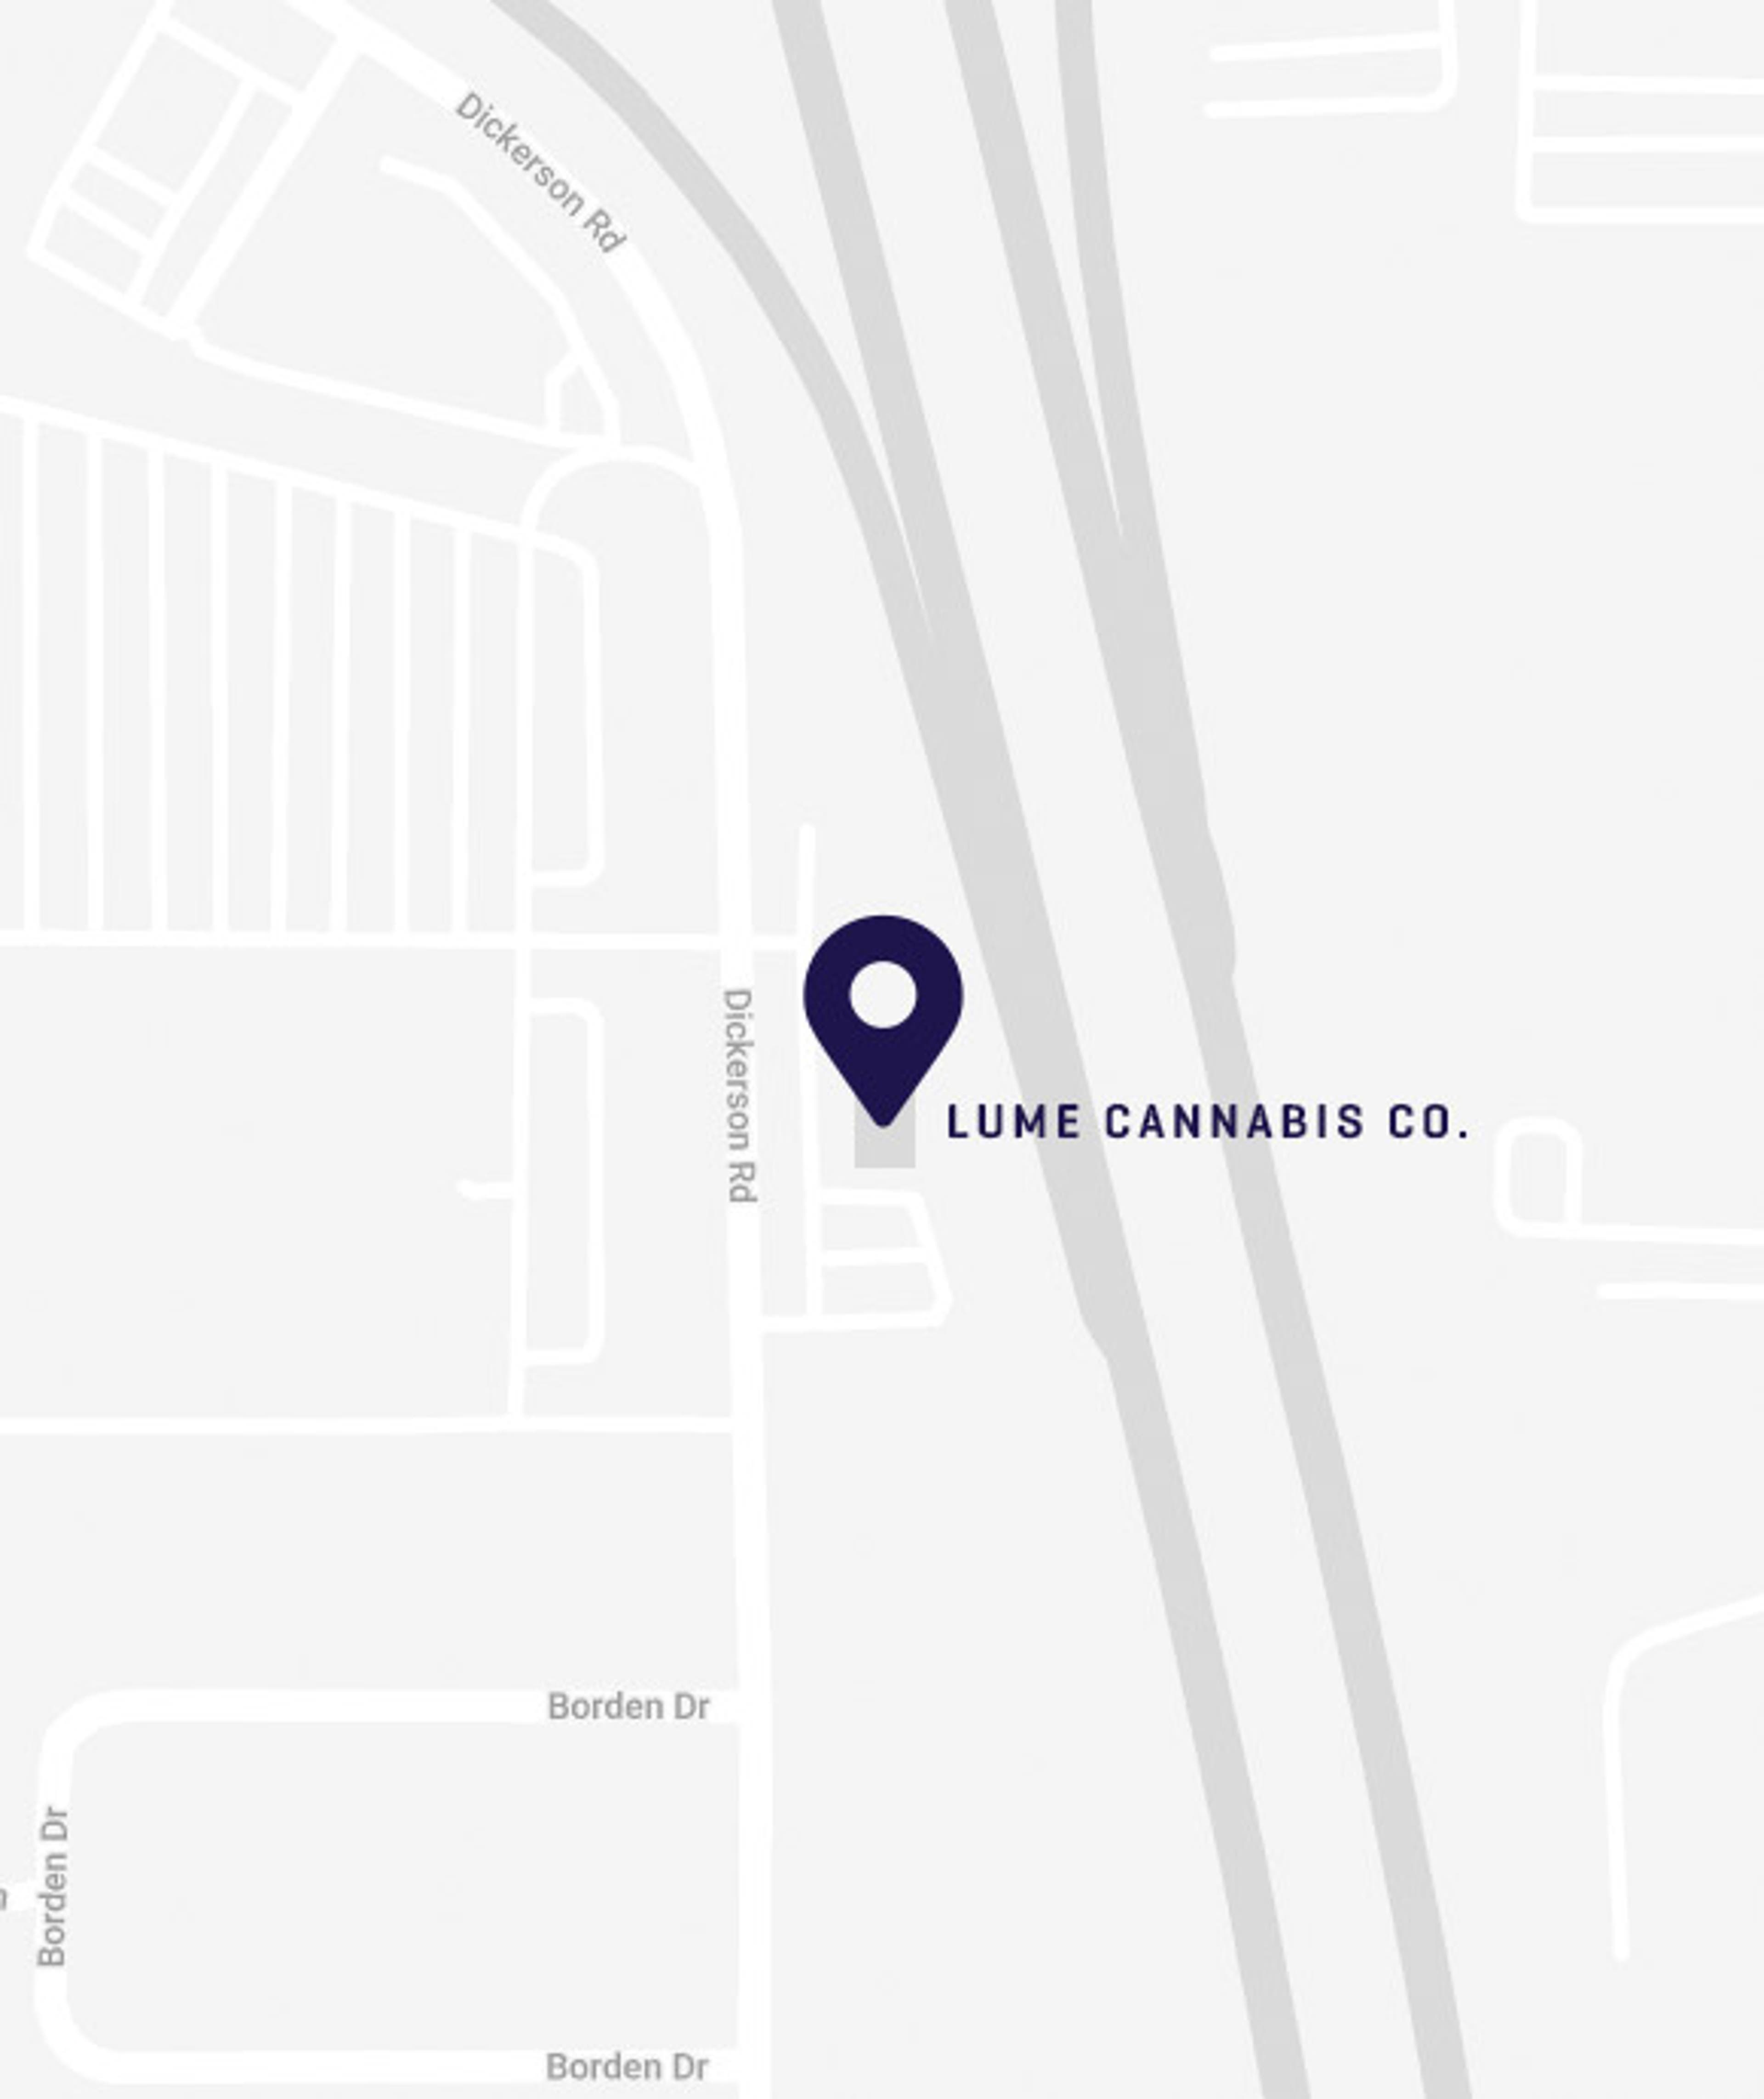 Location of Lume Cannabis dispensary in Gaylord, MI